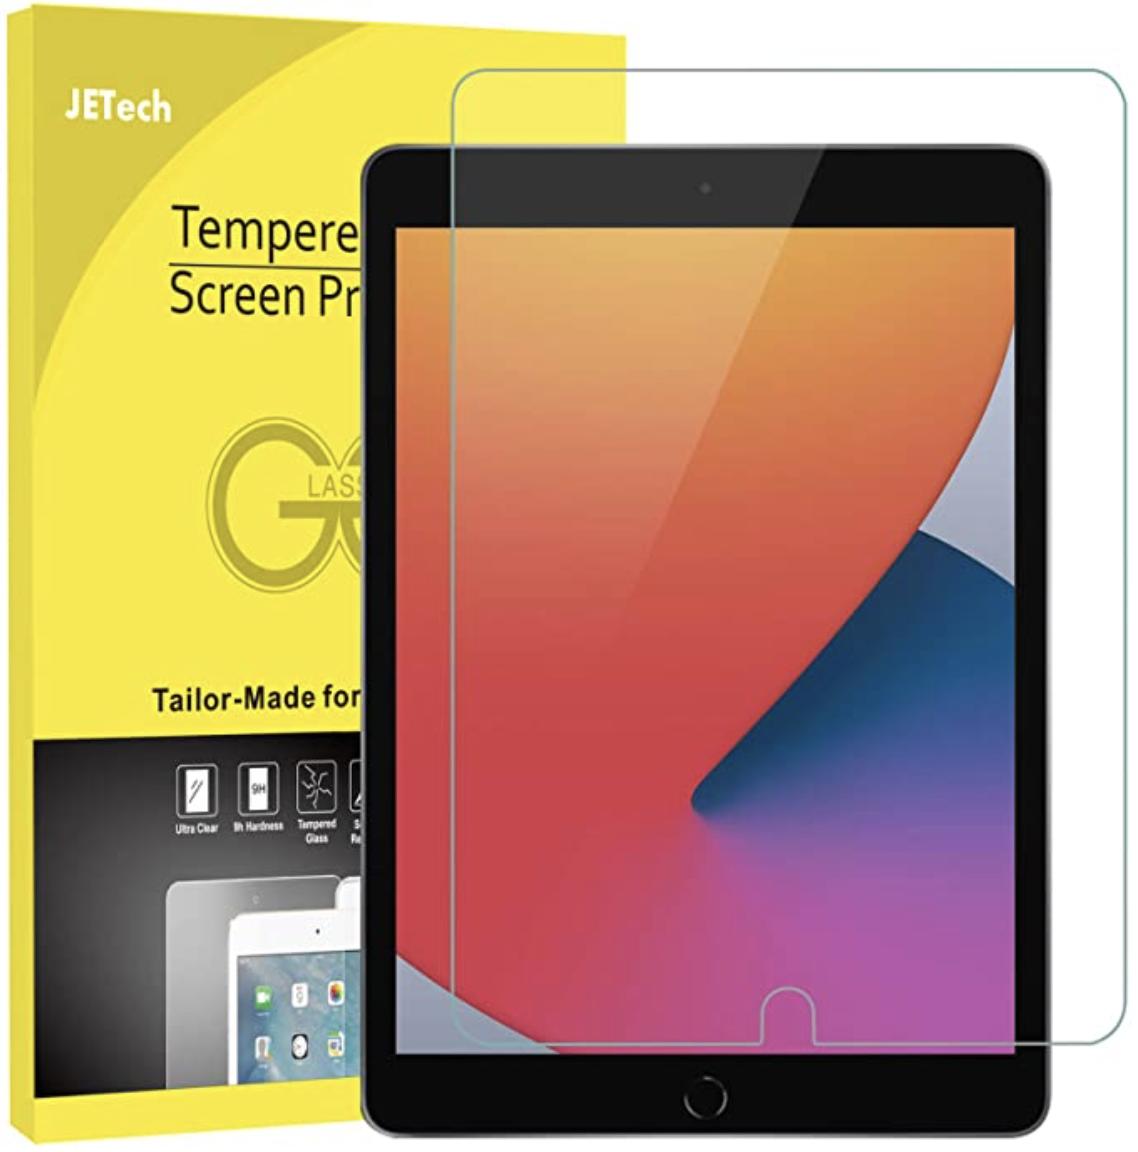 Jetech Screen Protector Best Ipad Accessories 8th Generation 2020 Render Cropped